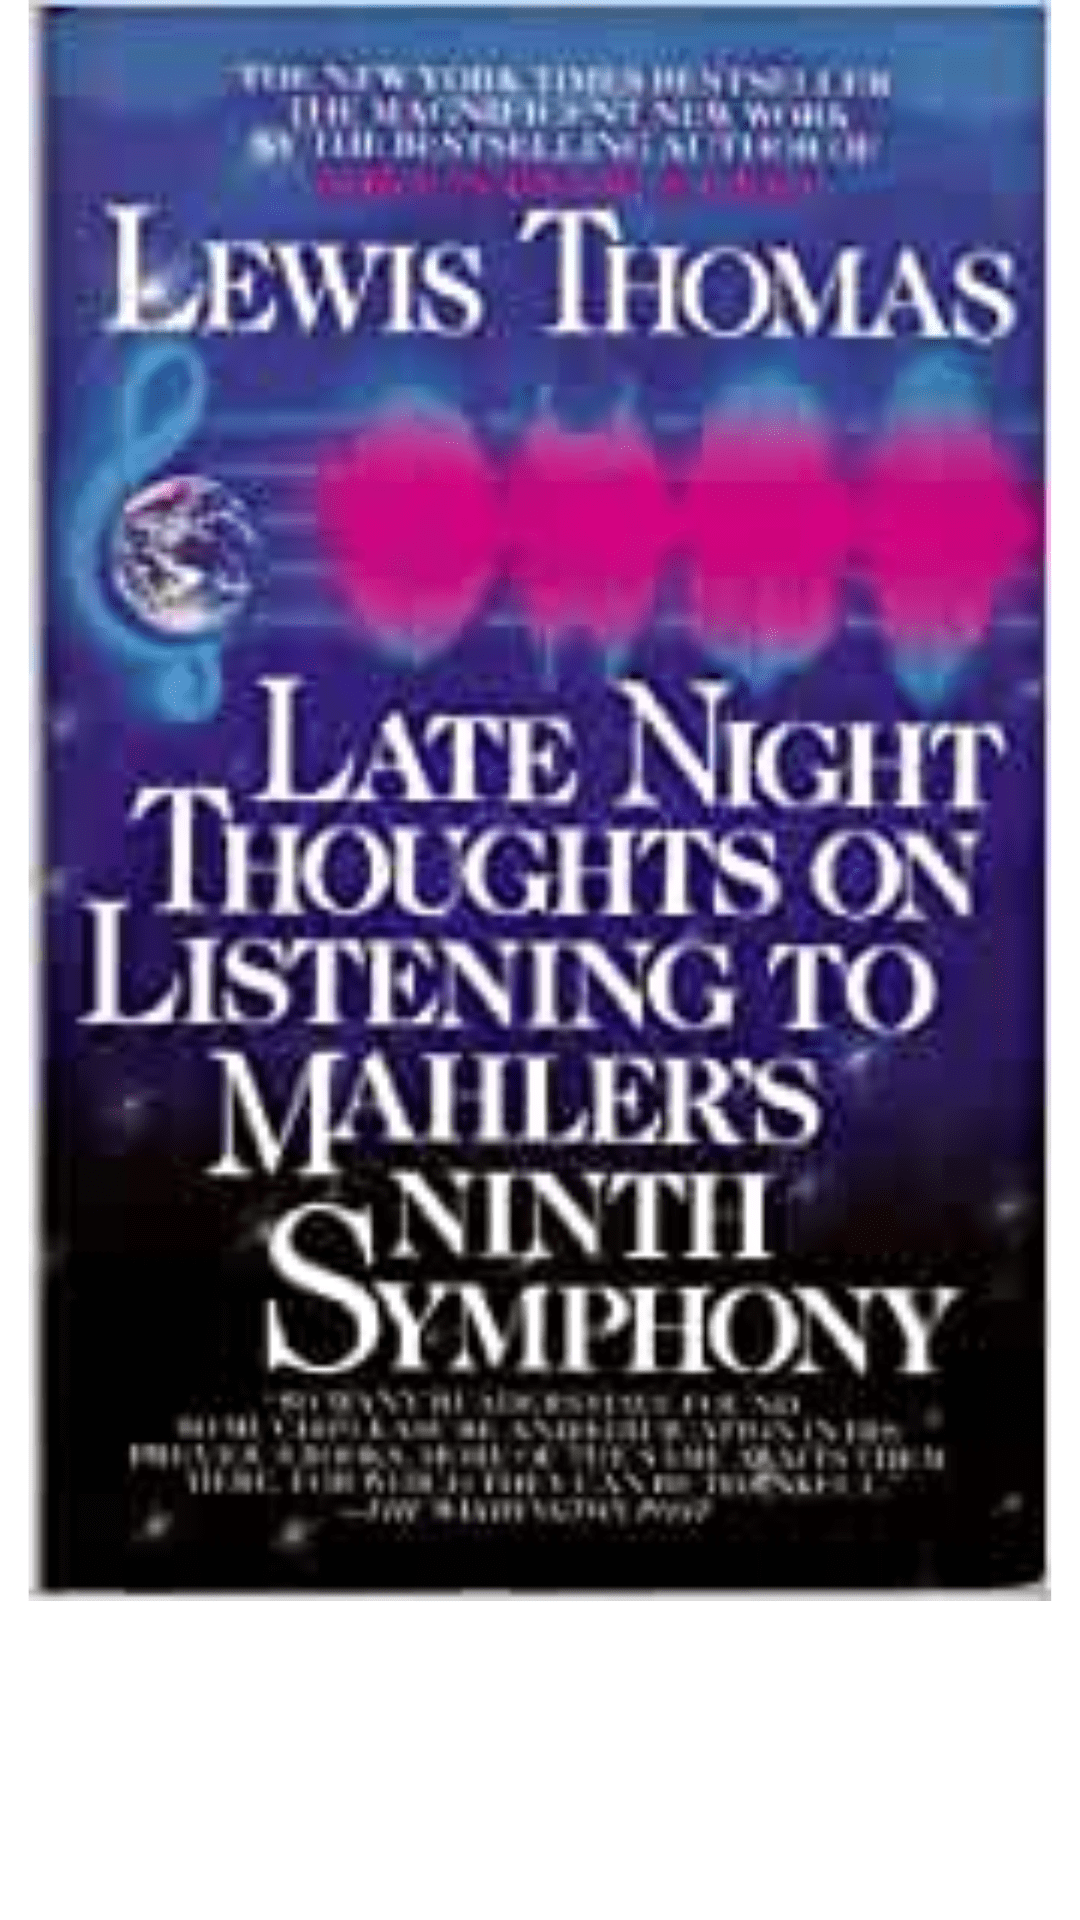 Late Night Thoughts to Mahler's Ninth Syphony